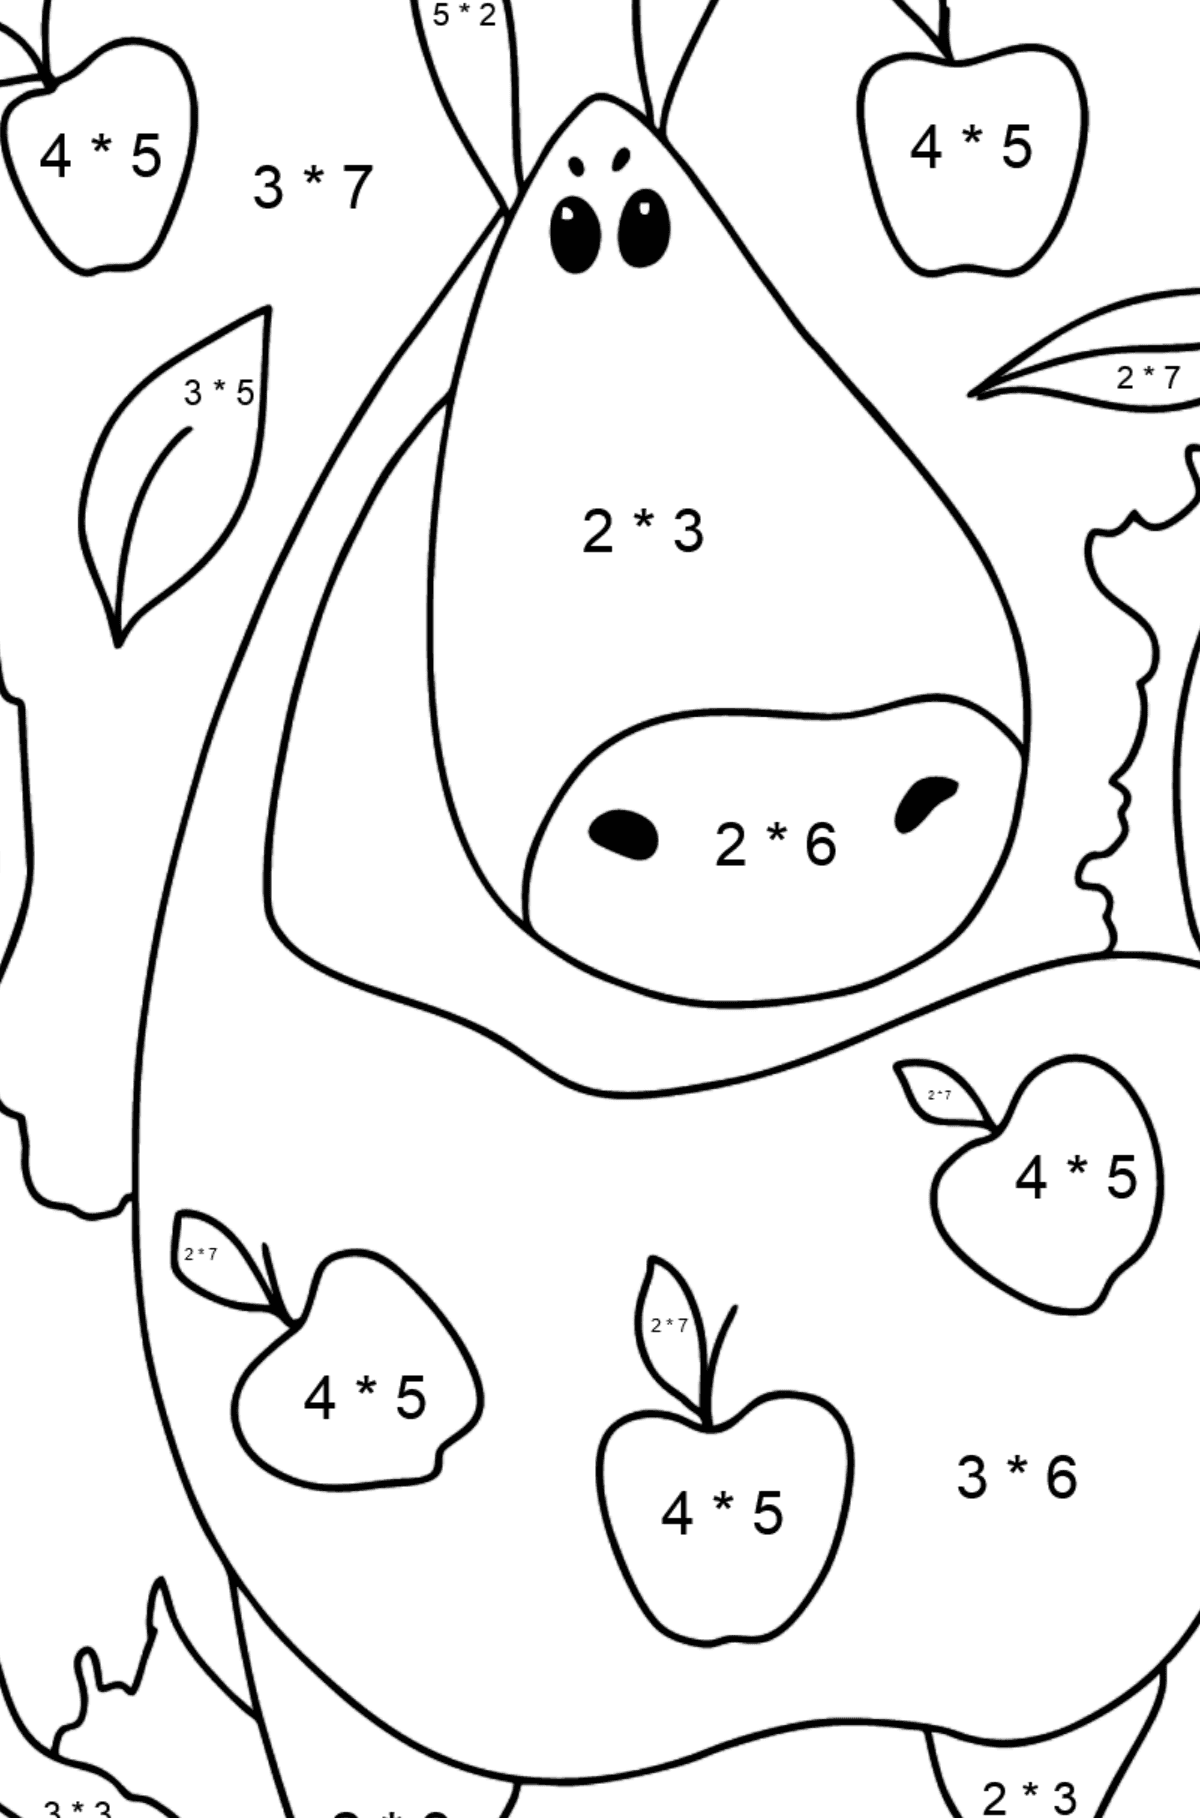 Coloring page cute horse (difficult) - Math Coloring - Multiplication for Kids